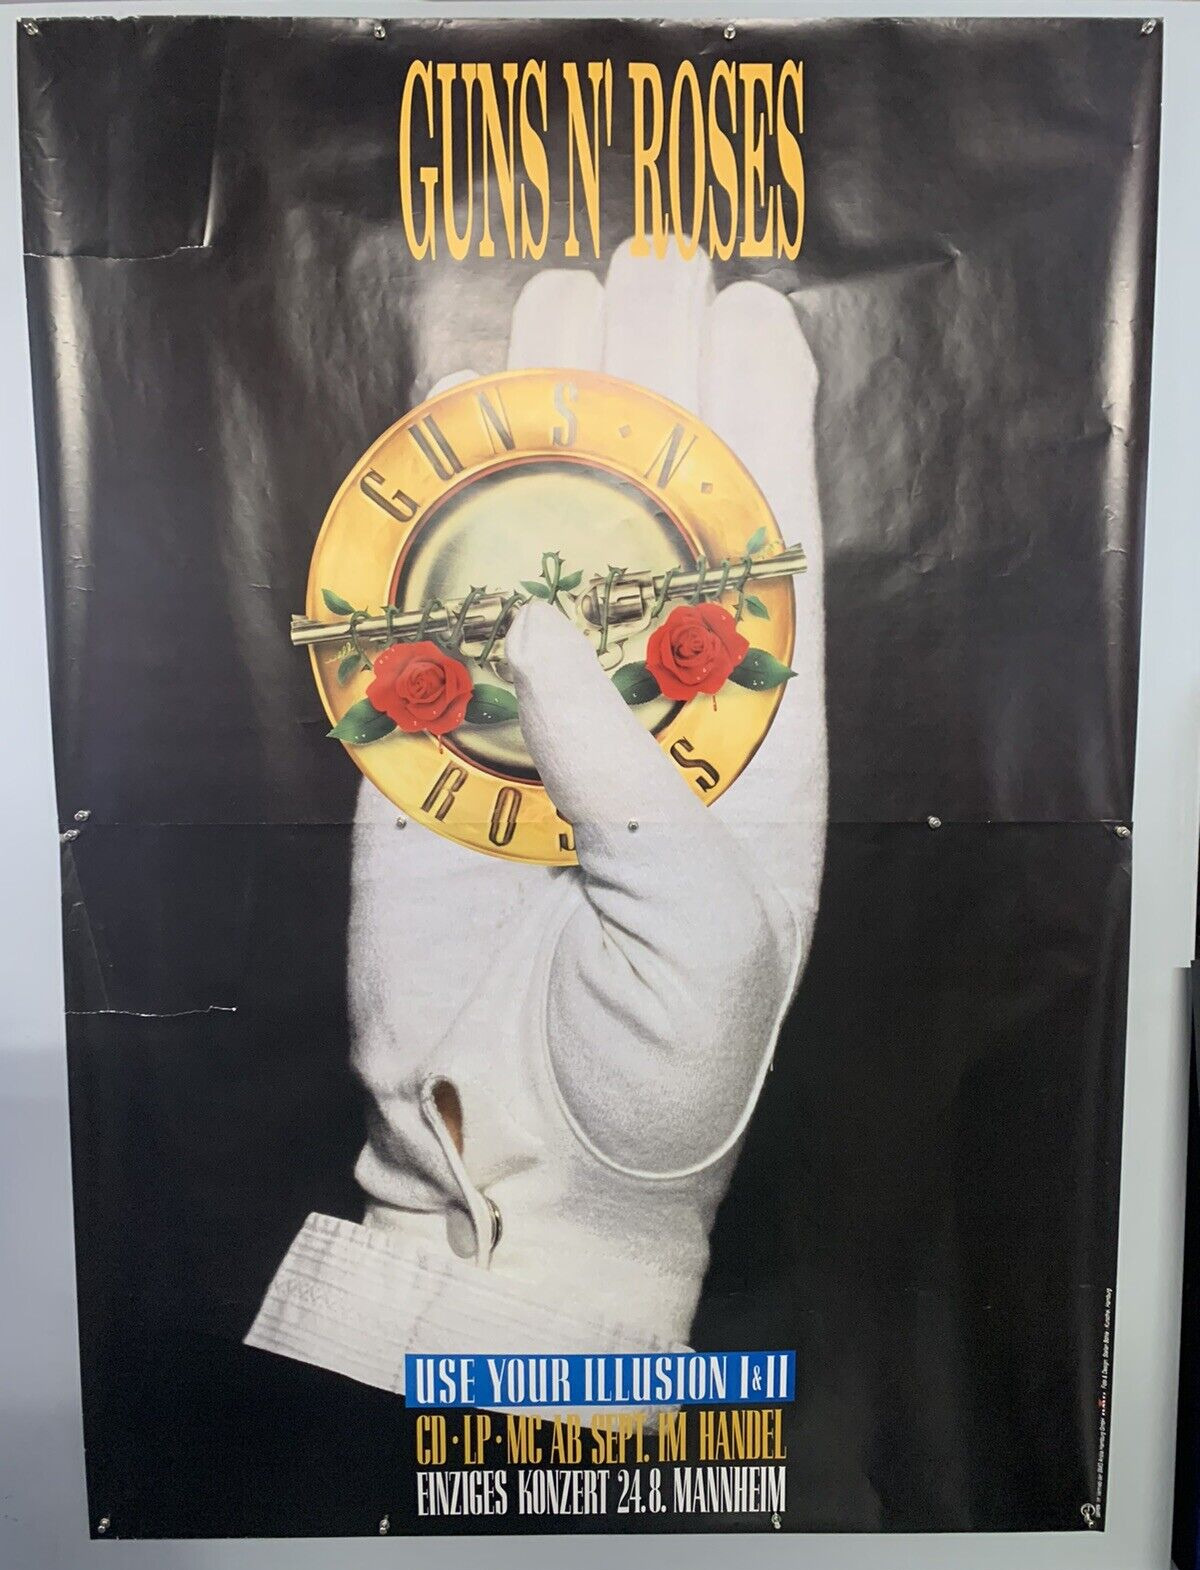 Guns N Roses Poster Huge 2 Part Geffen Promo Use Your Illusion I & II 1991  